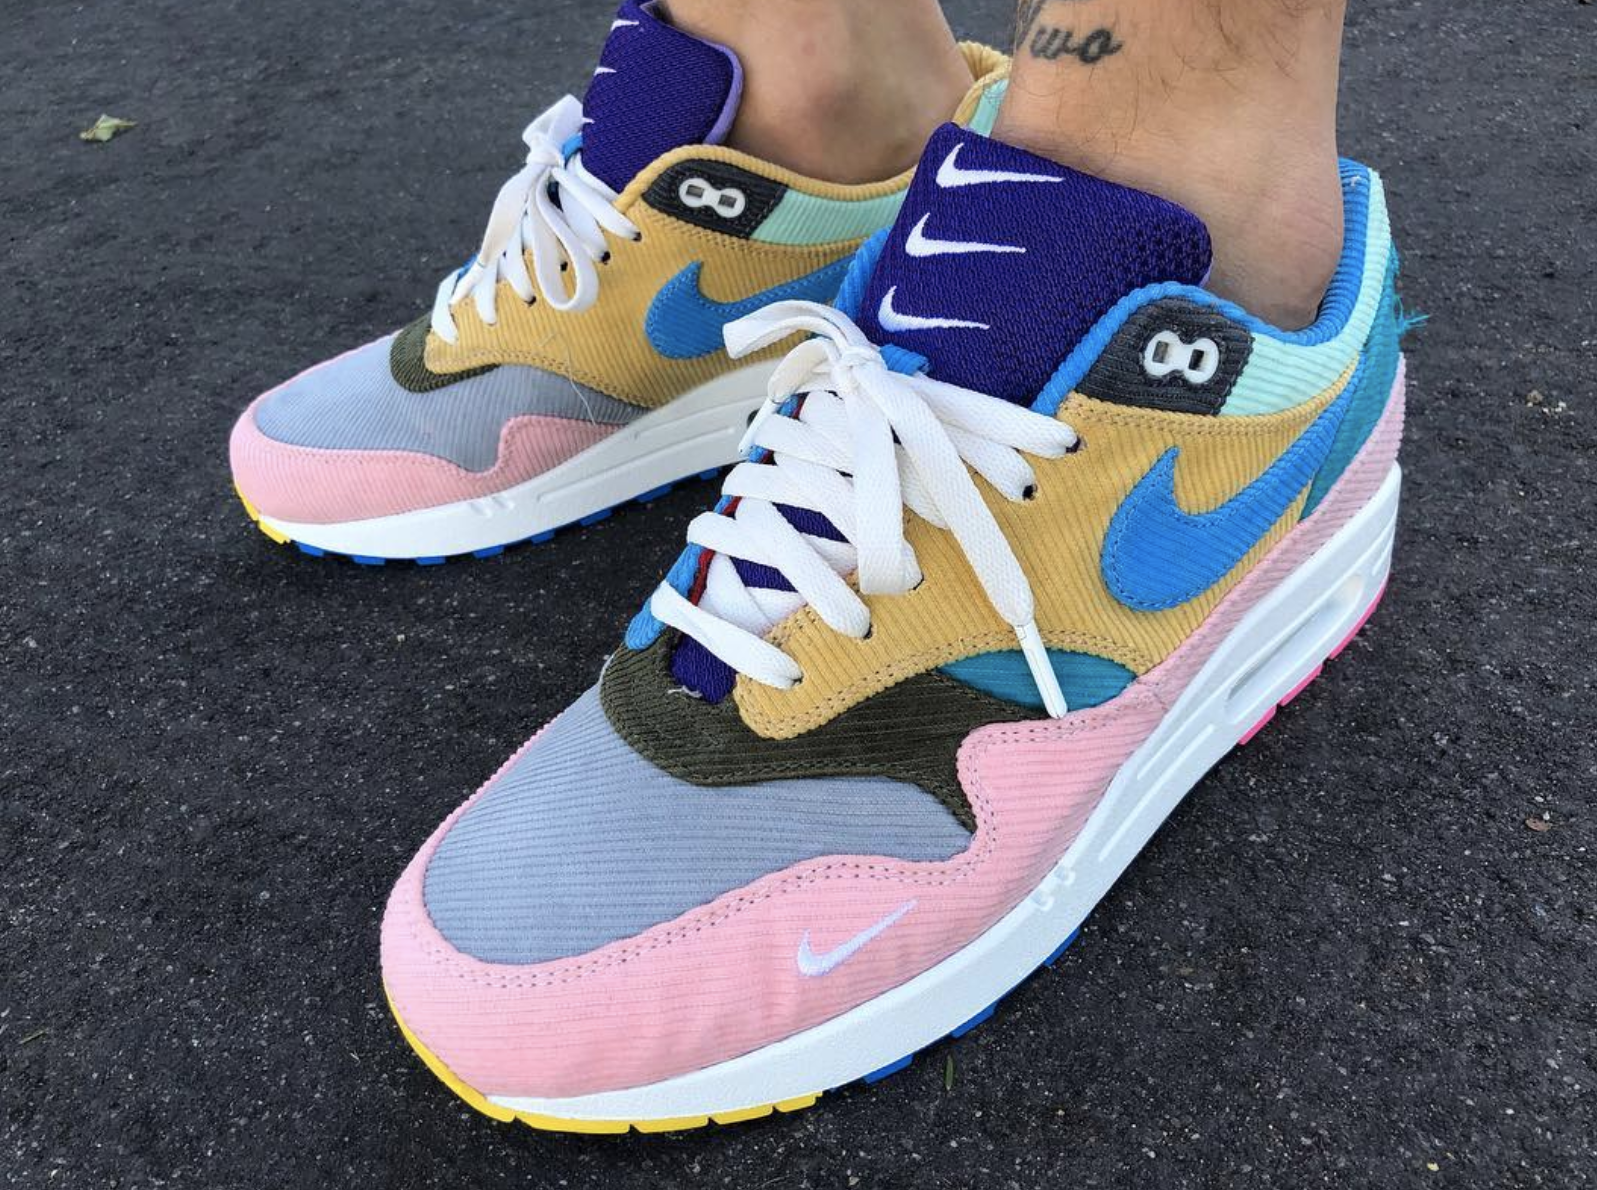 Sean Wotherspoon Shows Bespoke Air Max 1s | Complex